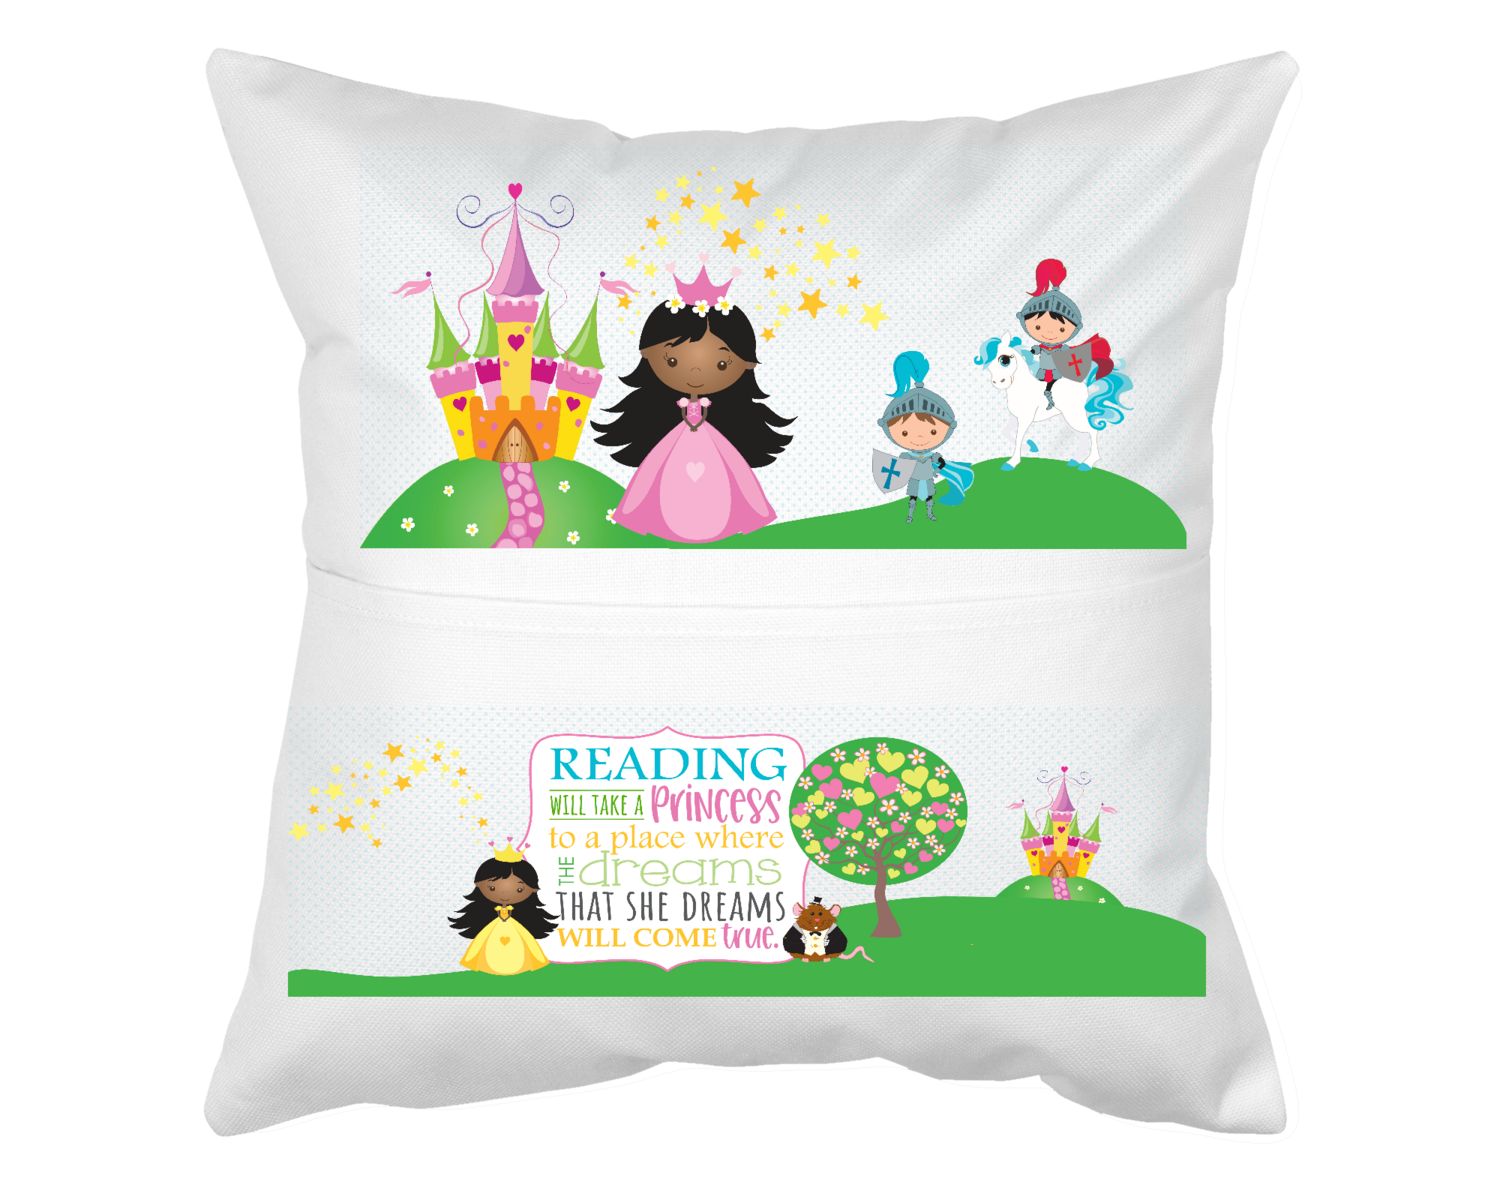 Pillow with Pocket: PRINCESS READING WILL TAKE A PRINCESS TO A PLACE WHERE THE DREAMS WILL COME TRUE